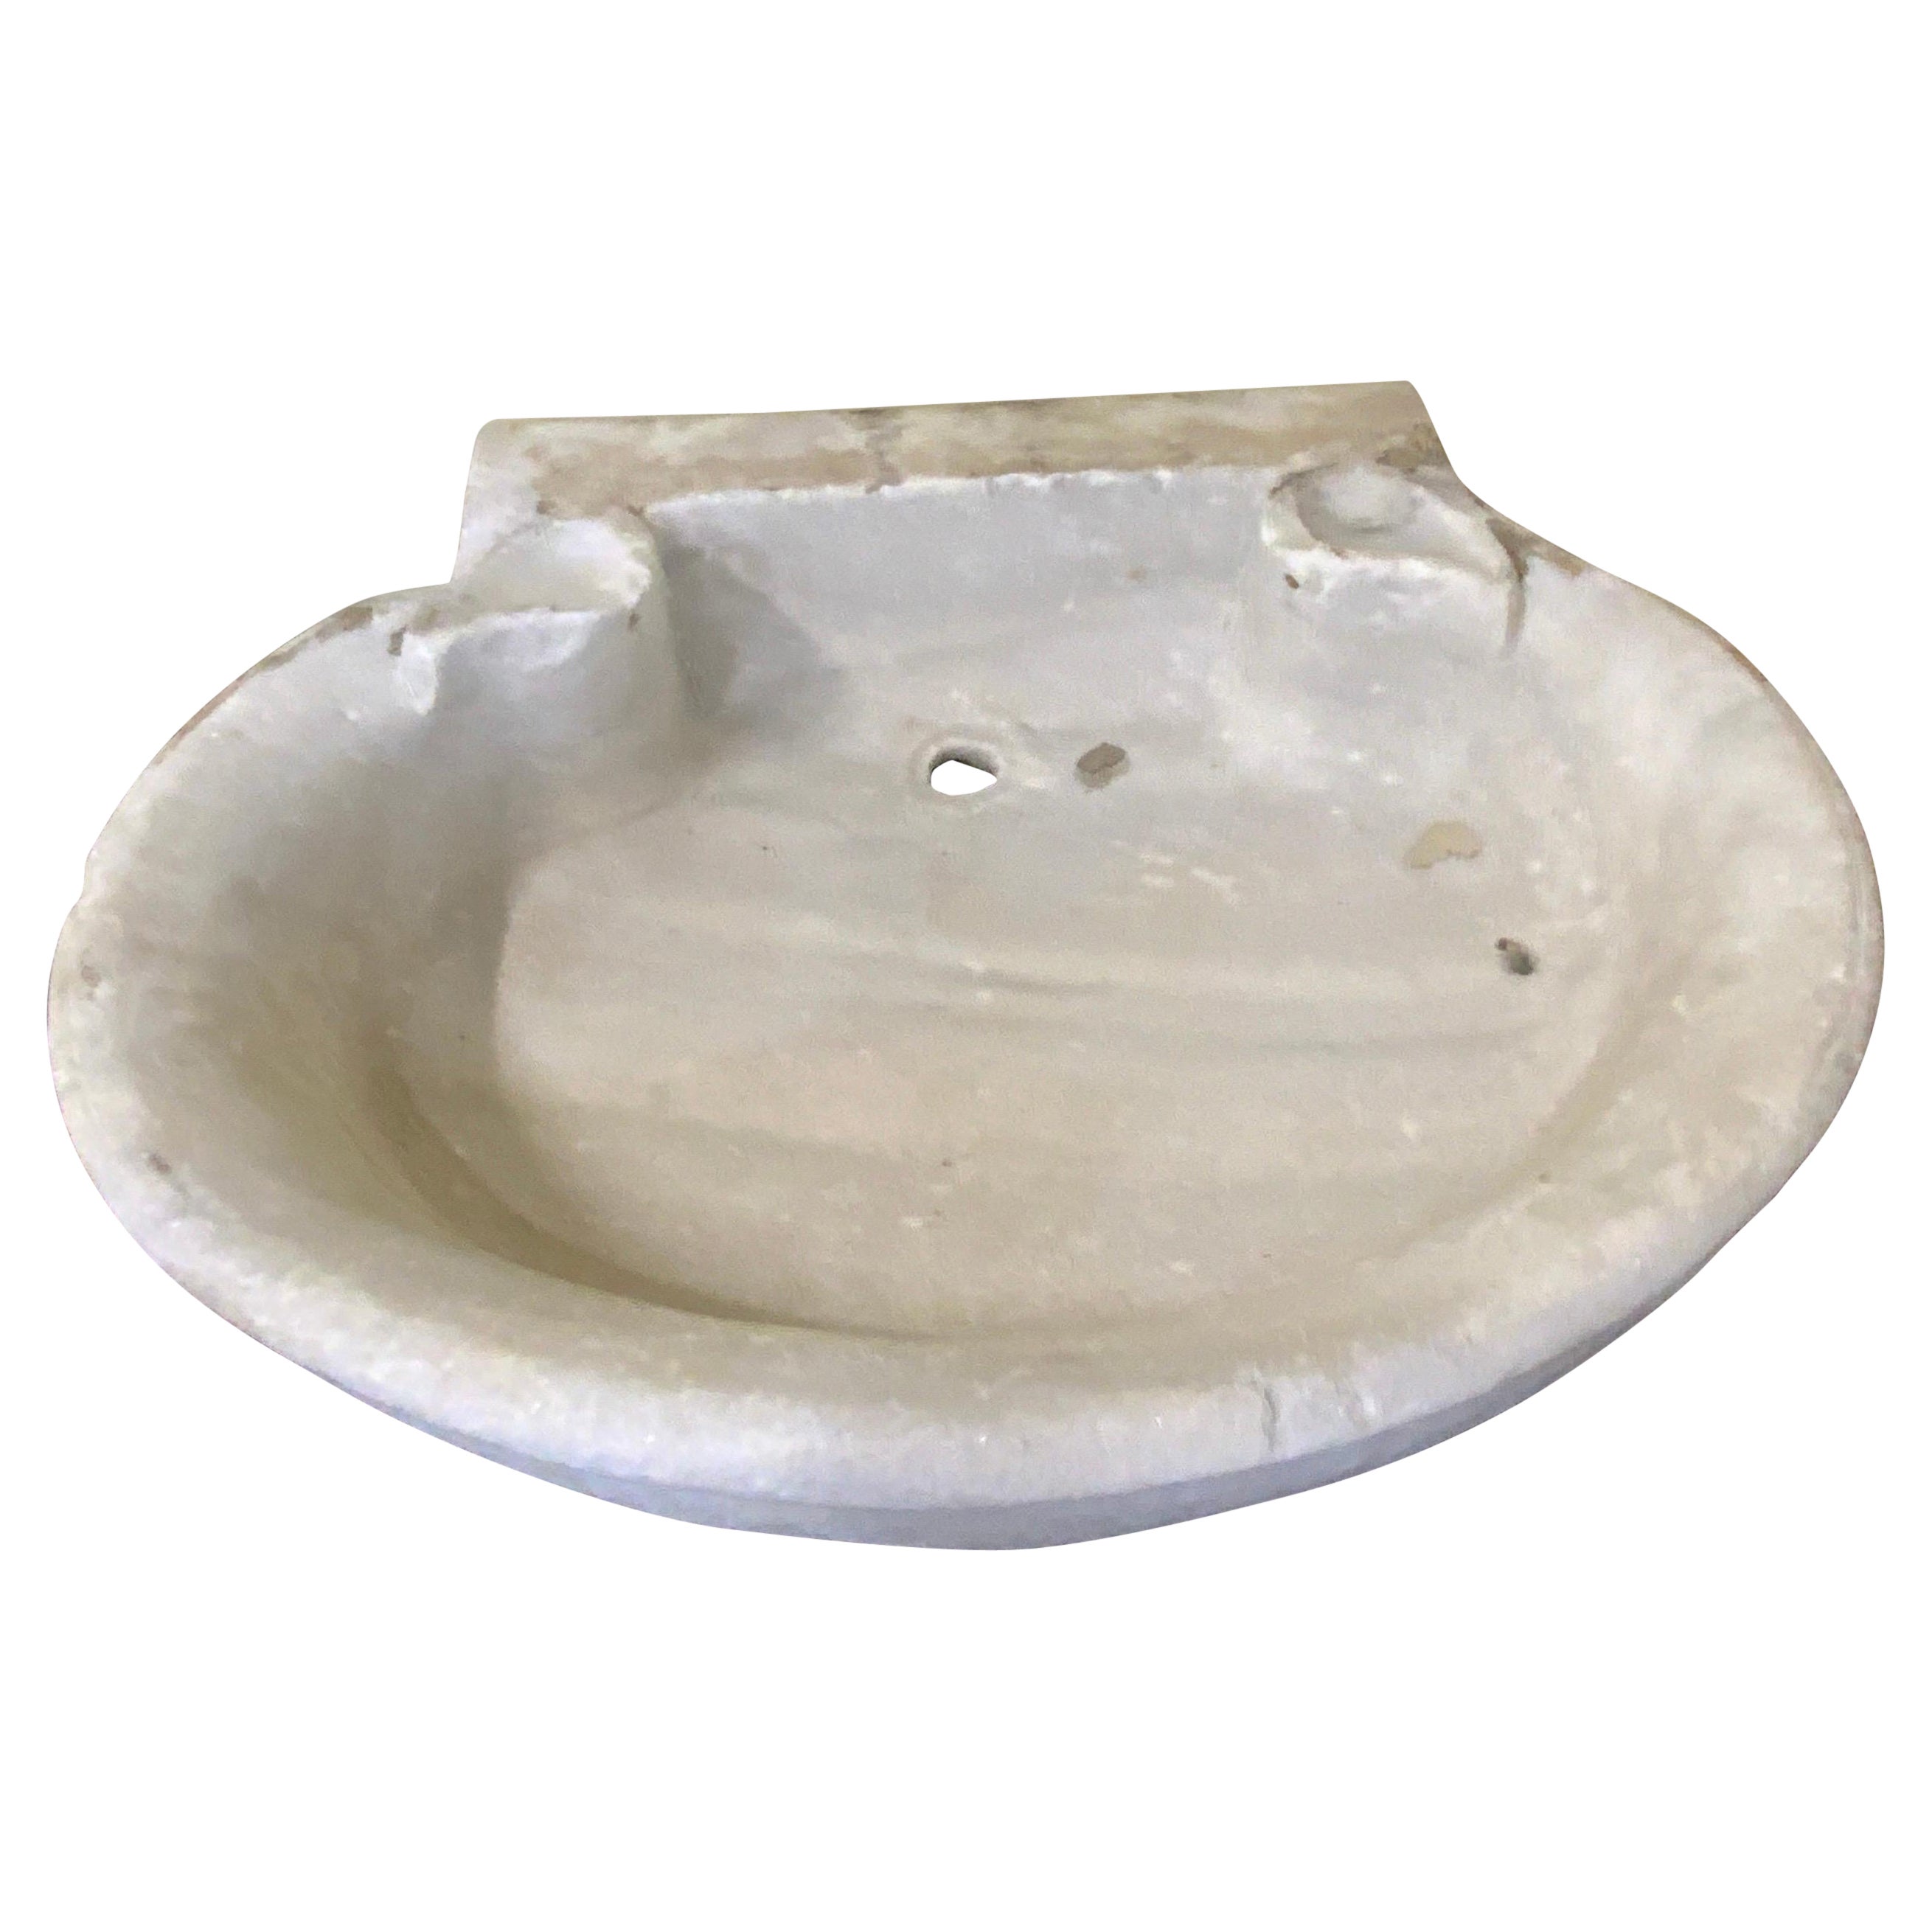 Early 19th Century White Marble Sink